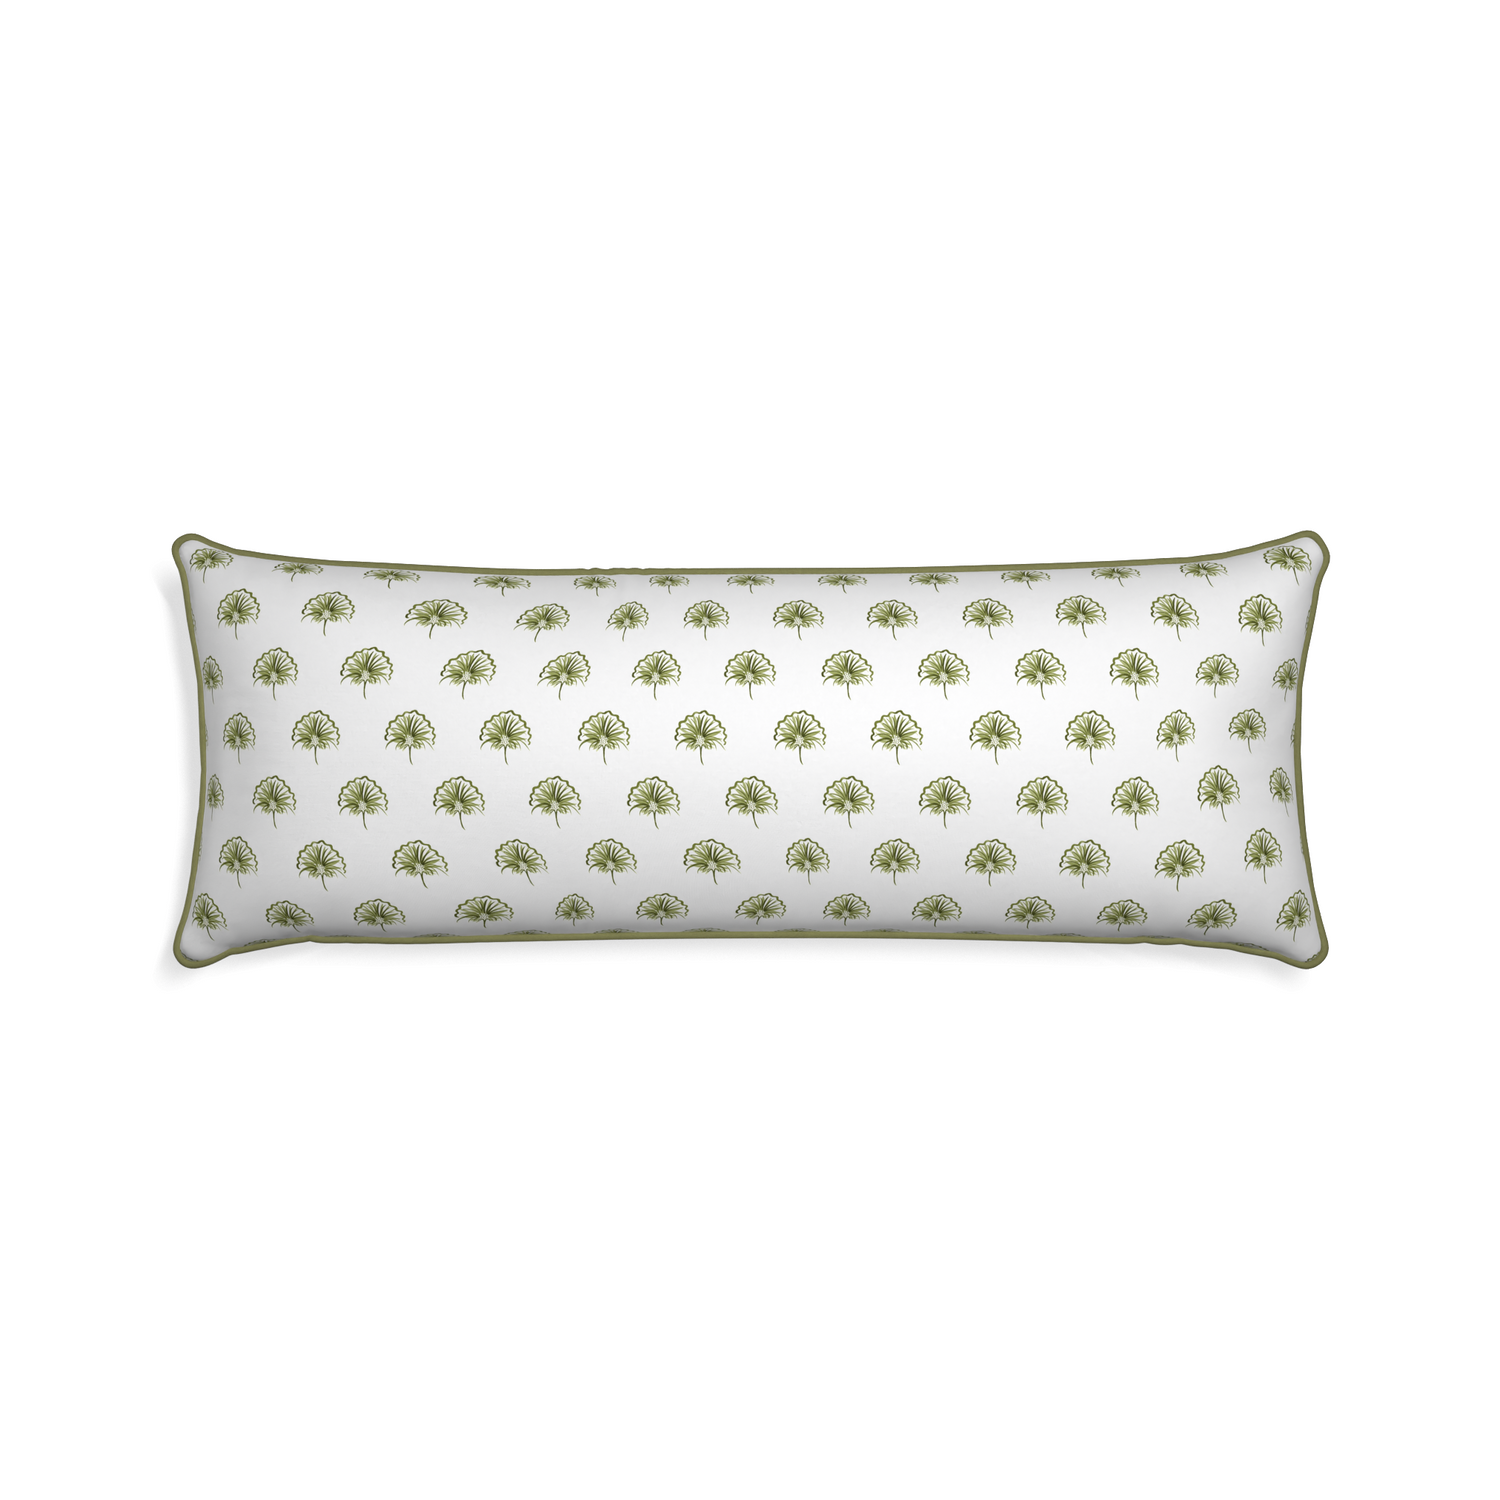 Xl-lumbar penelope moss custom pillow with moss piping on white background